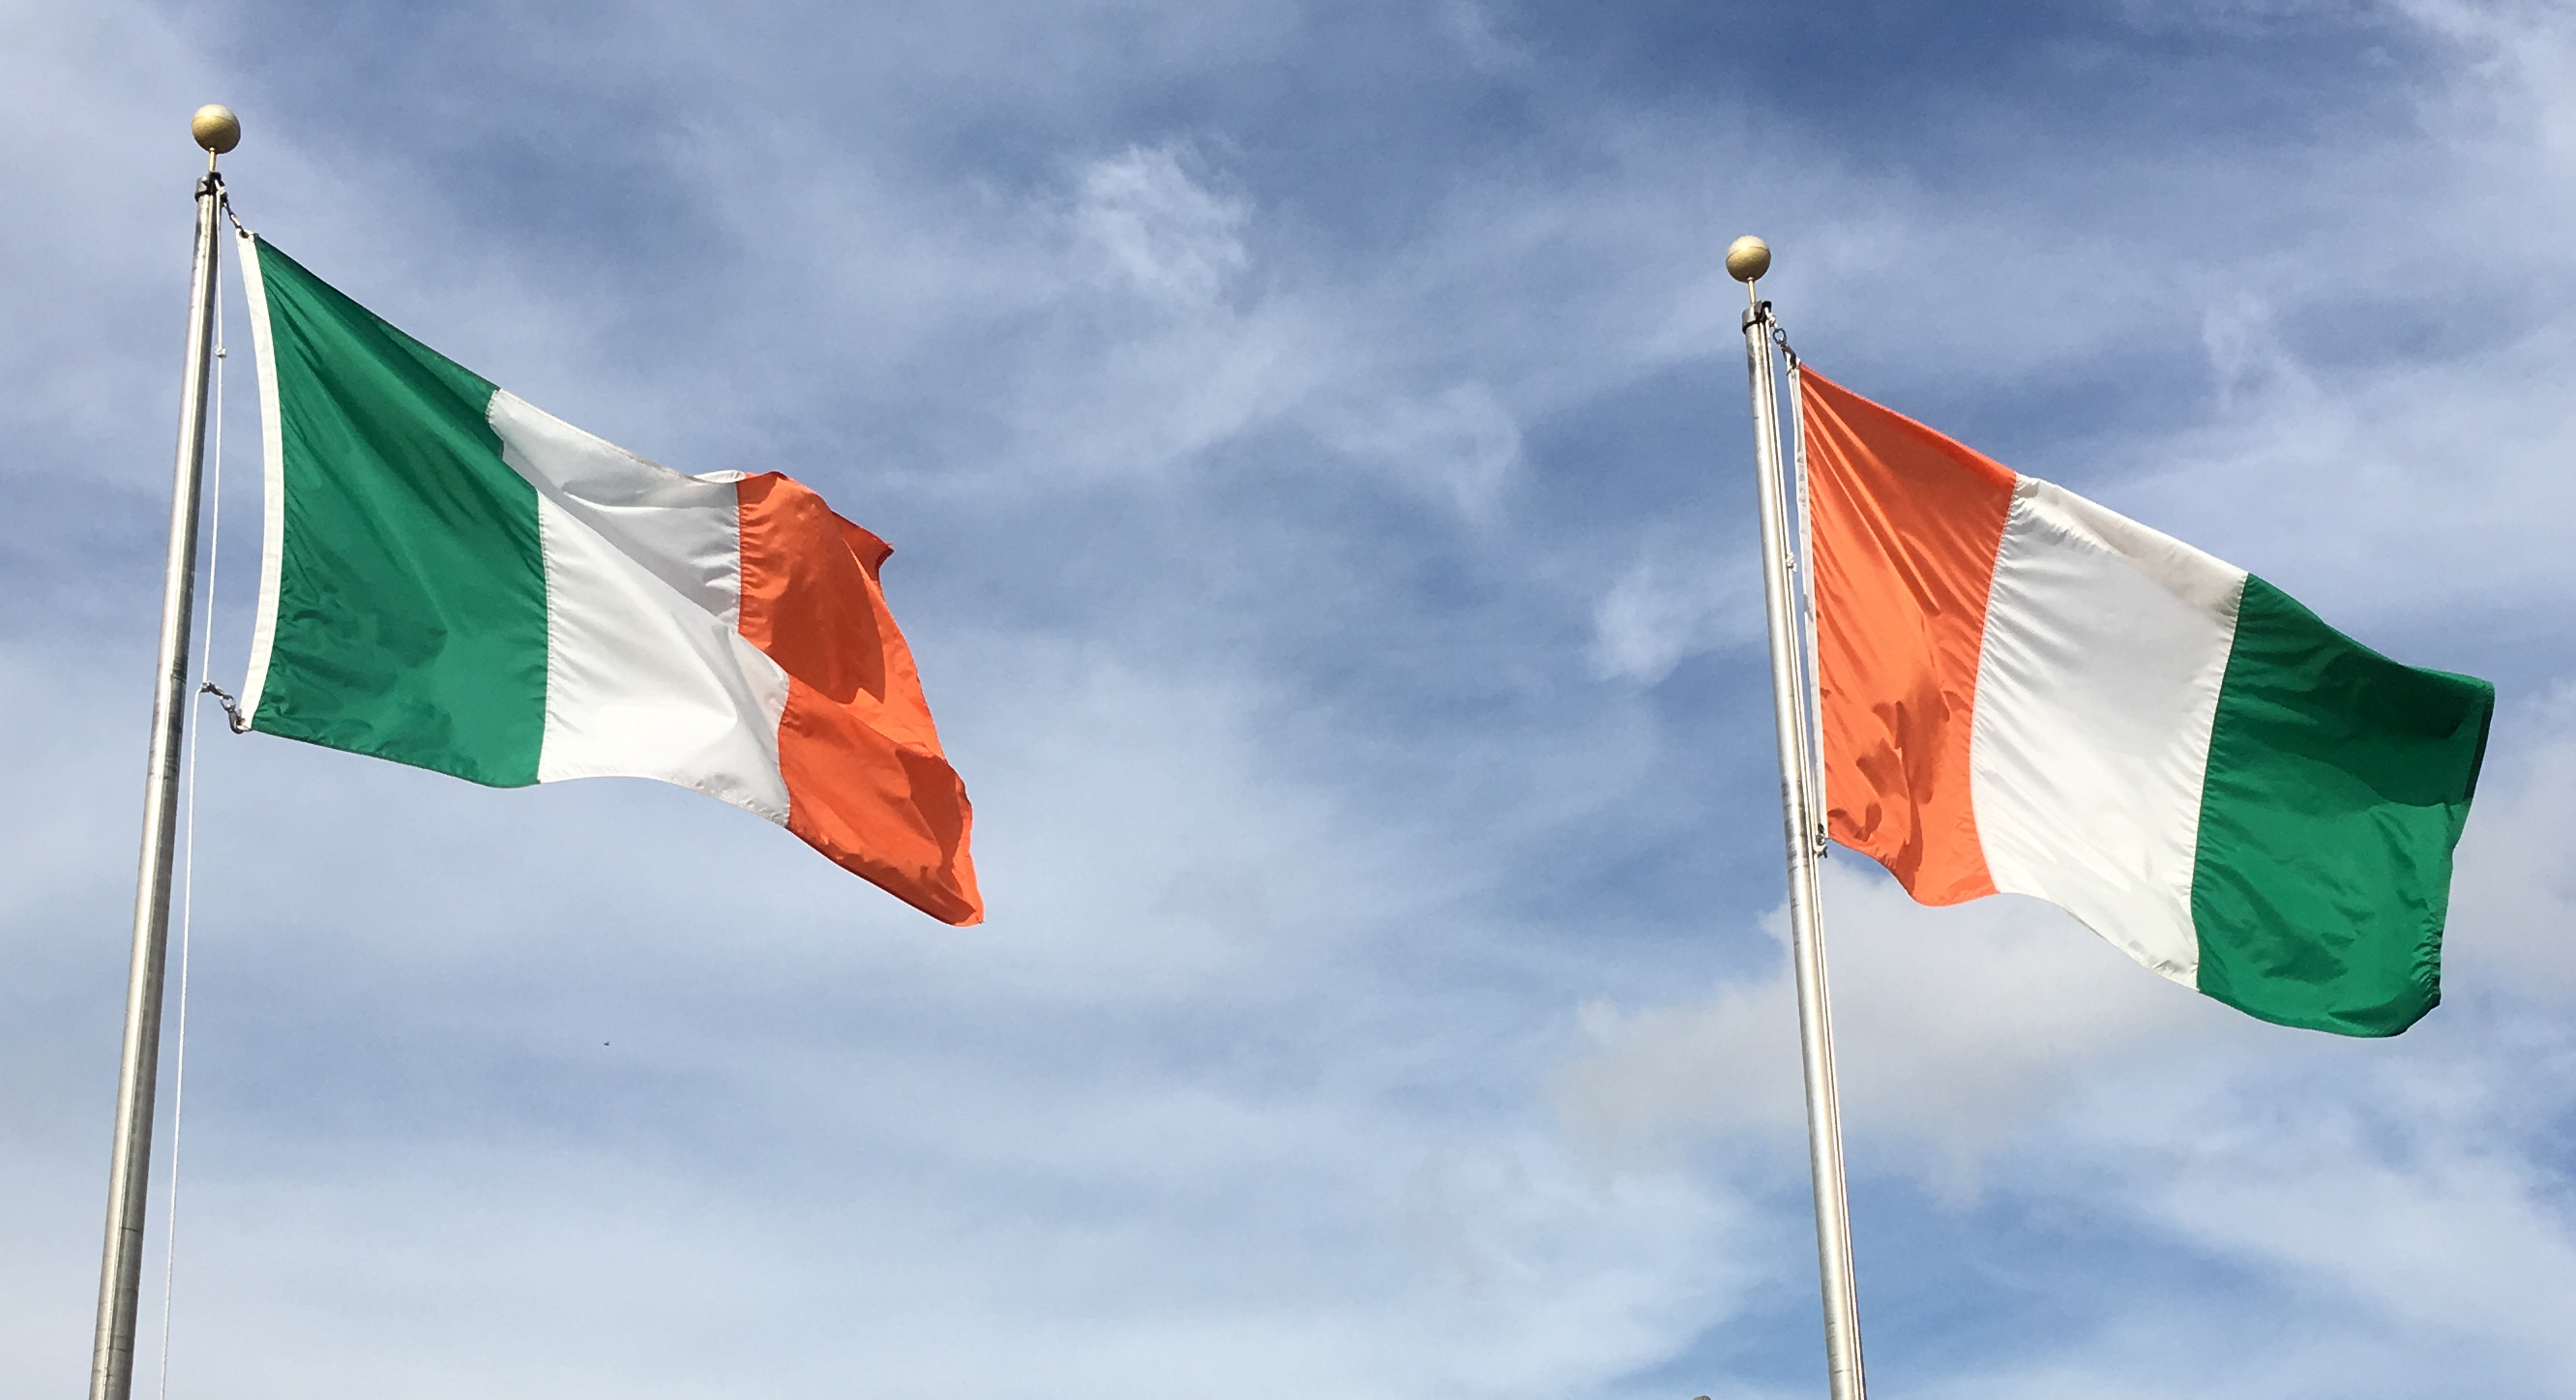 stilhed værdig Slud File:Flags of Ivory Coast and Ireland.png - Wikimedia Commons